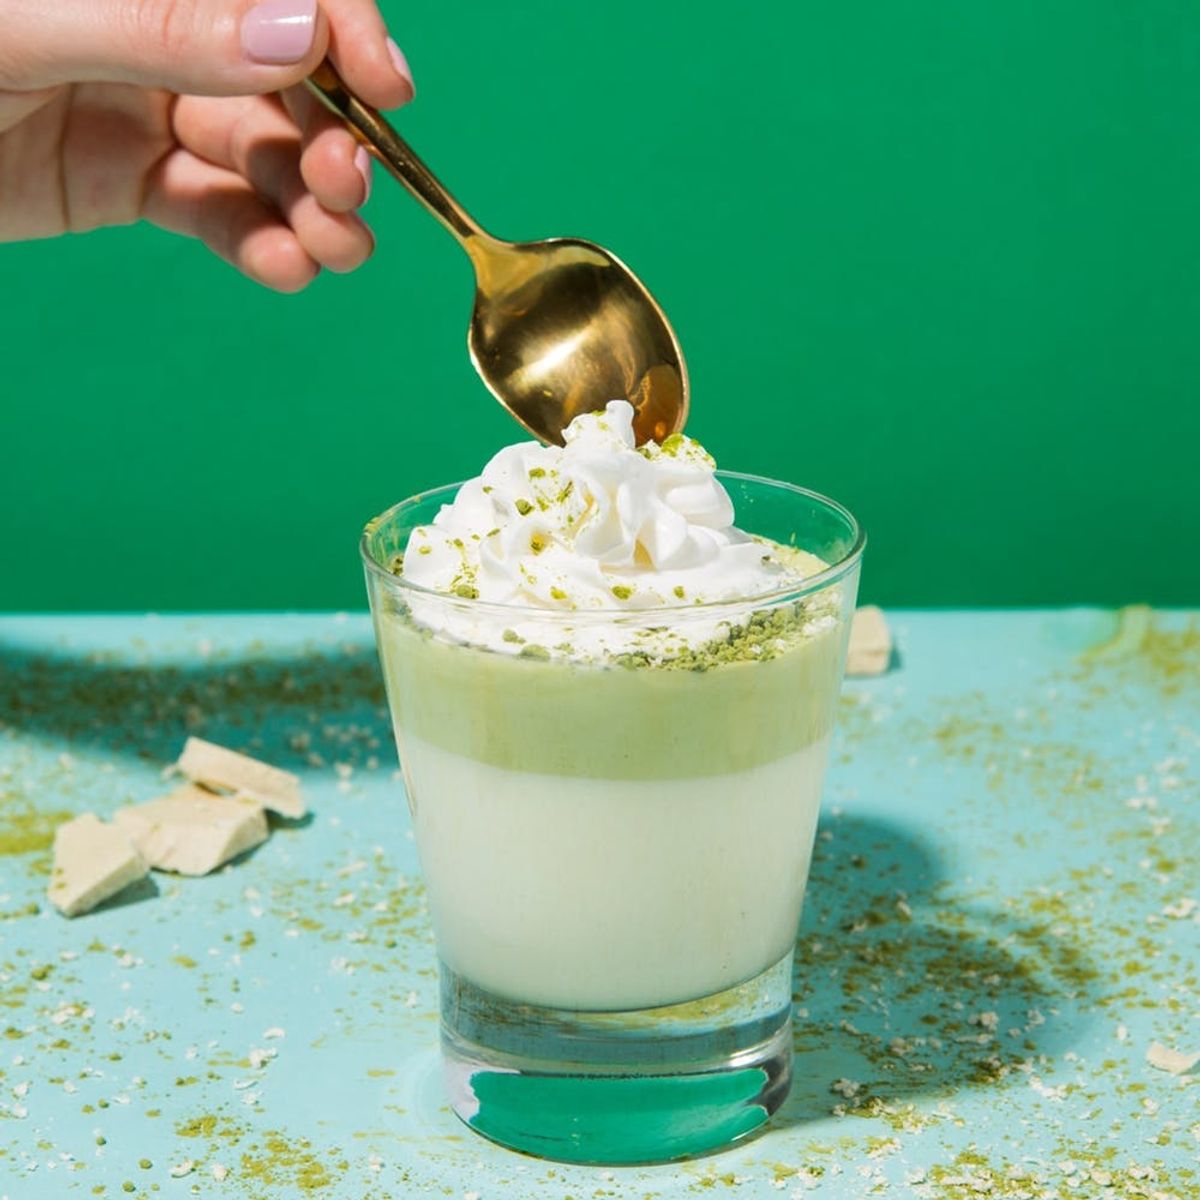 Add a Healthy Twist to Your St. Patrick’s Day Celebration With This Matcha White Chocolate Mousse Recipe